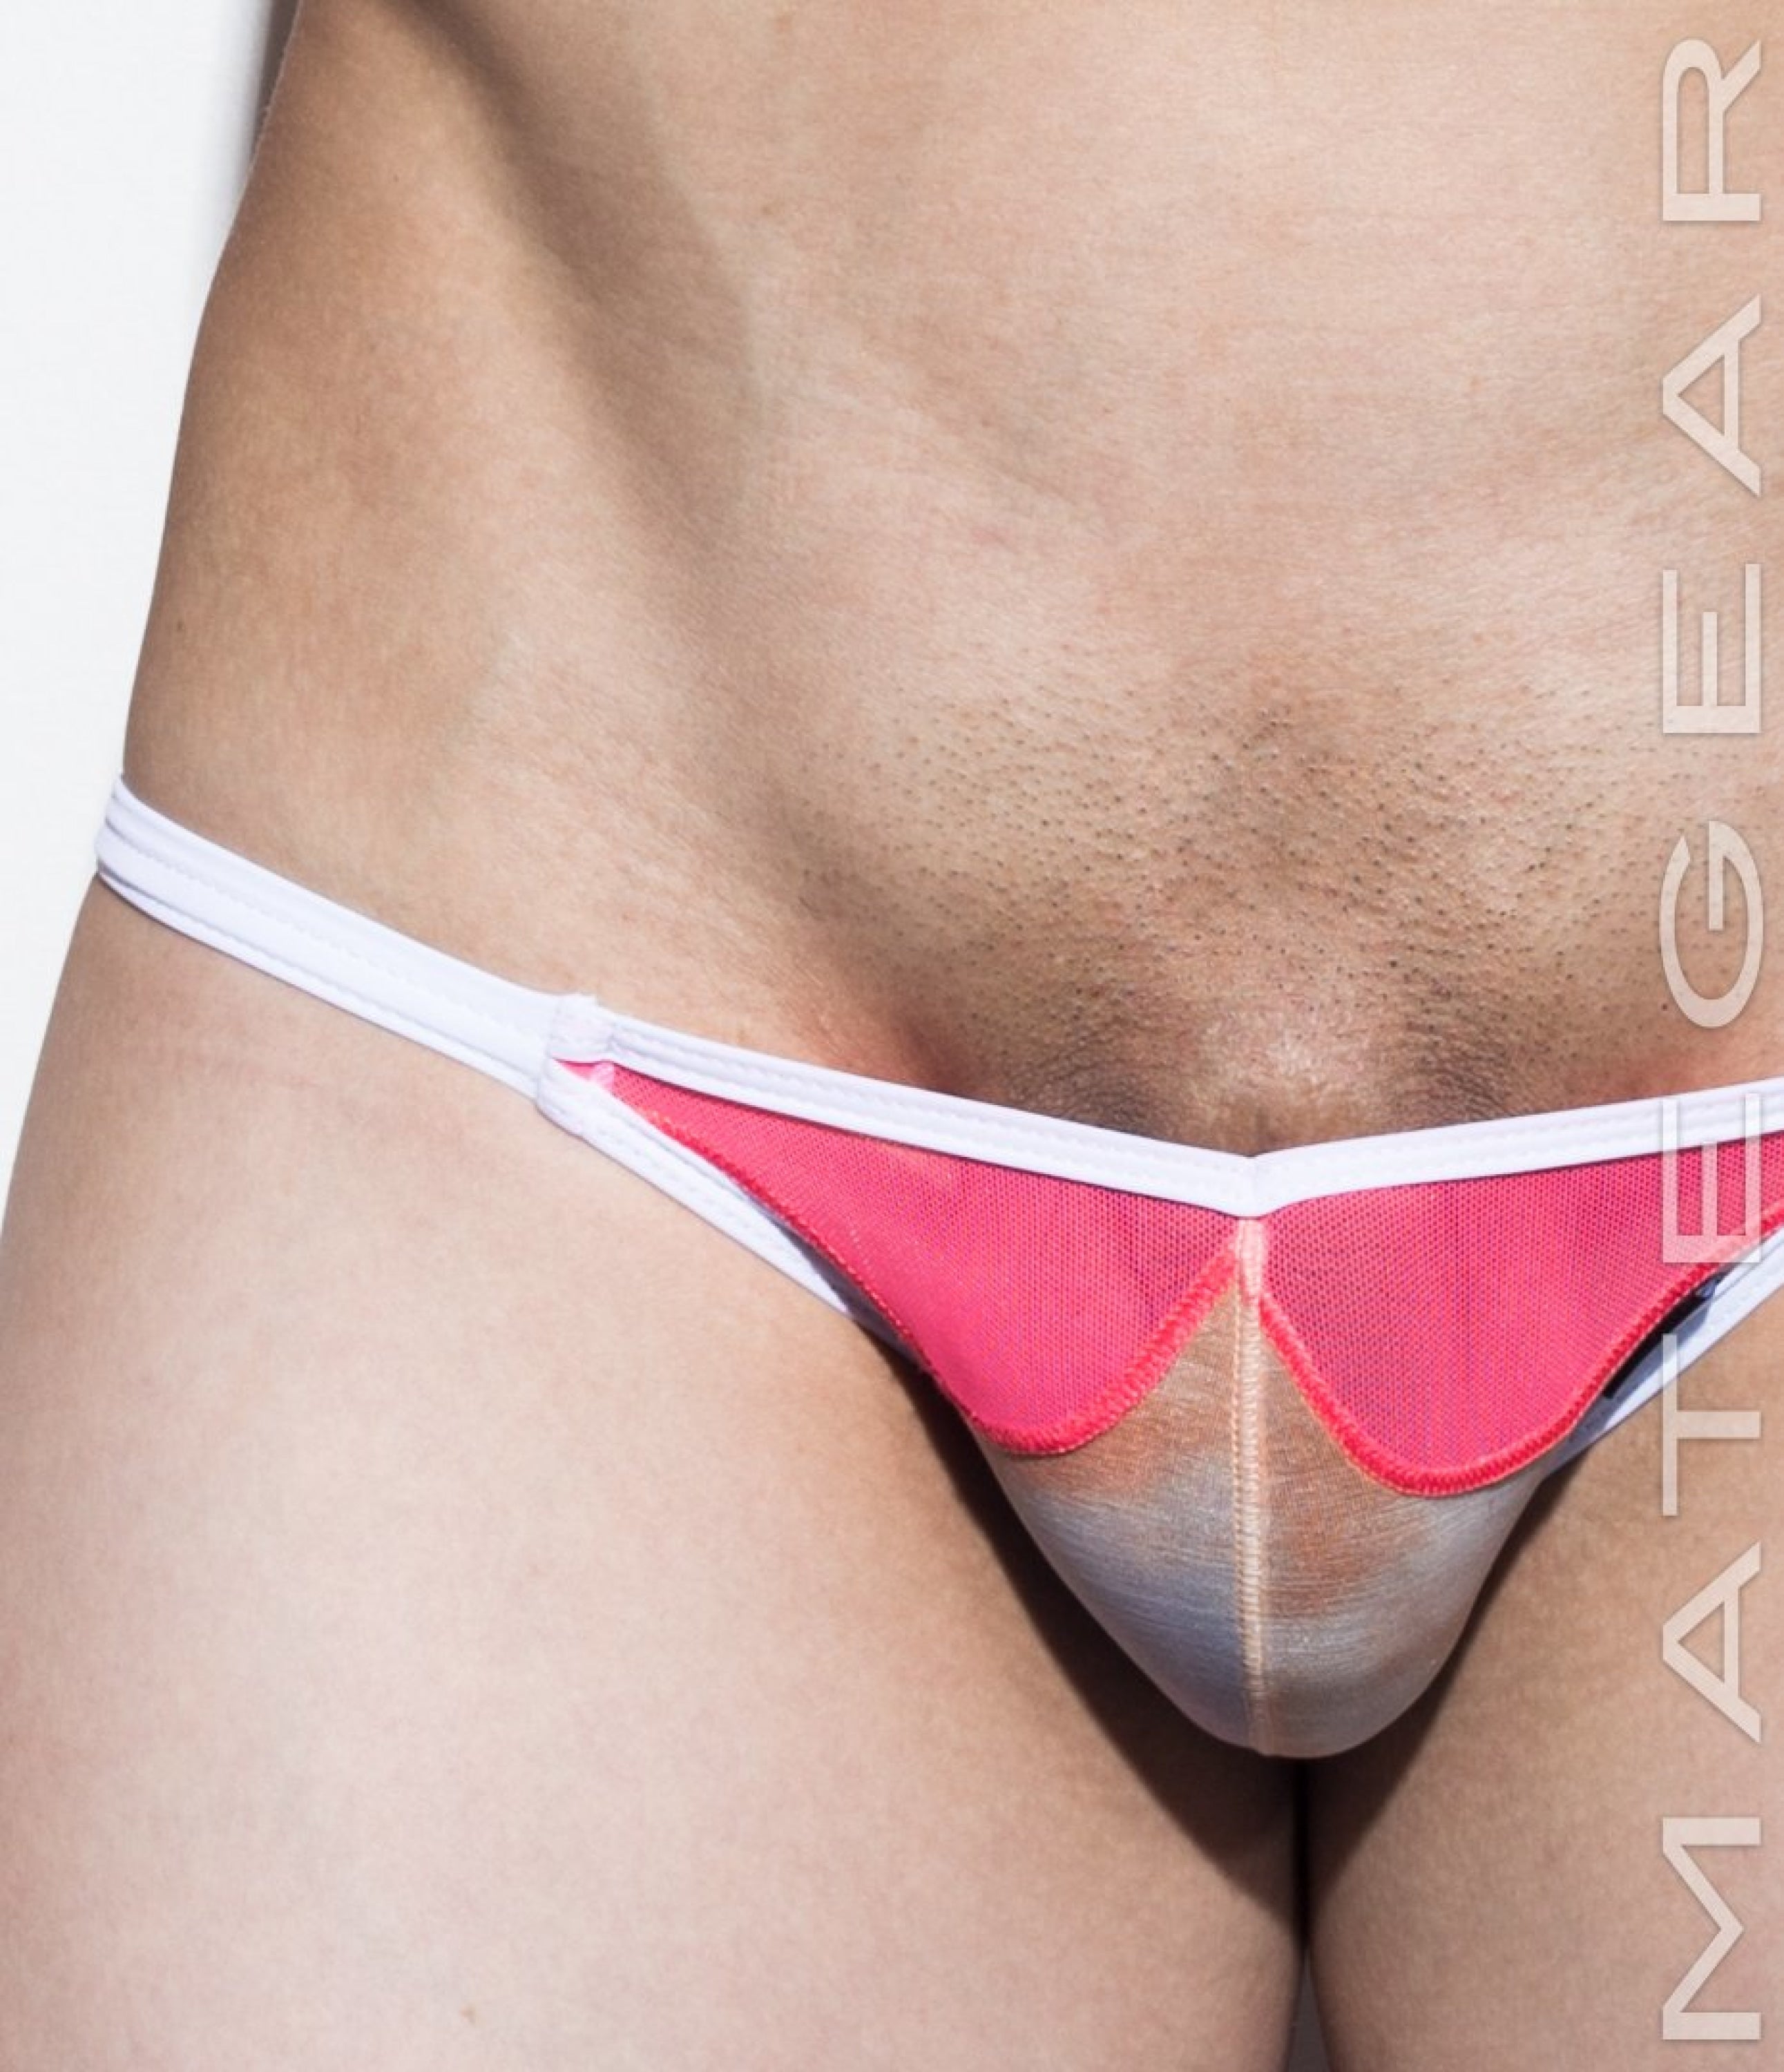 Sexy Men's Underwear Extremely Sexy Mini Jock - Tae Woo - MATEGEAR - Sexy Men's Swimwear, Underwear, Sportswear and Loungewear